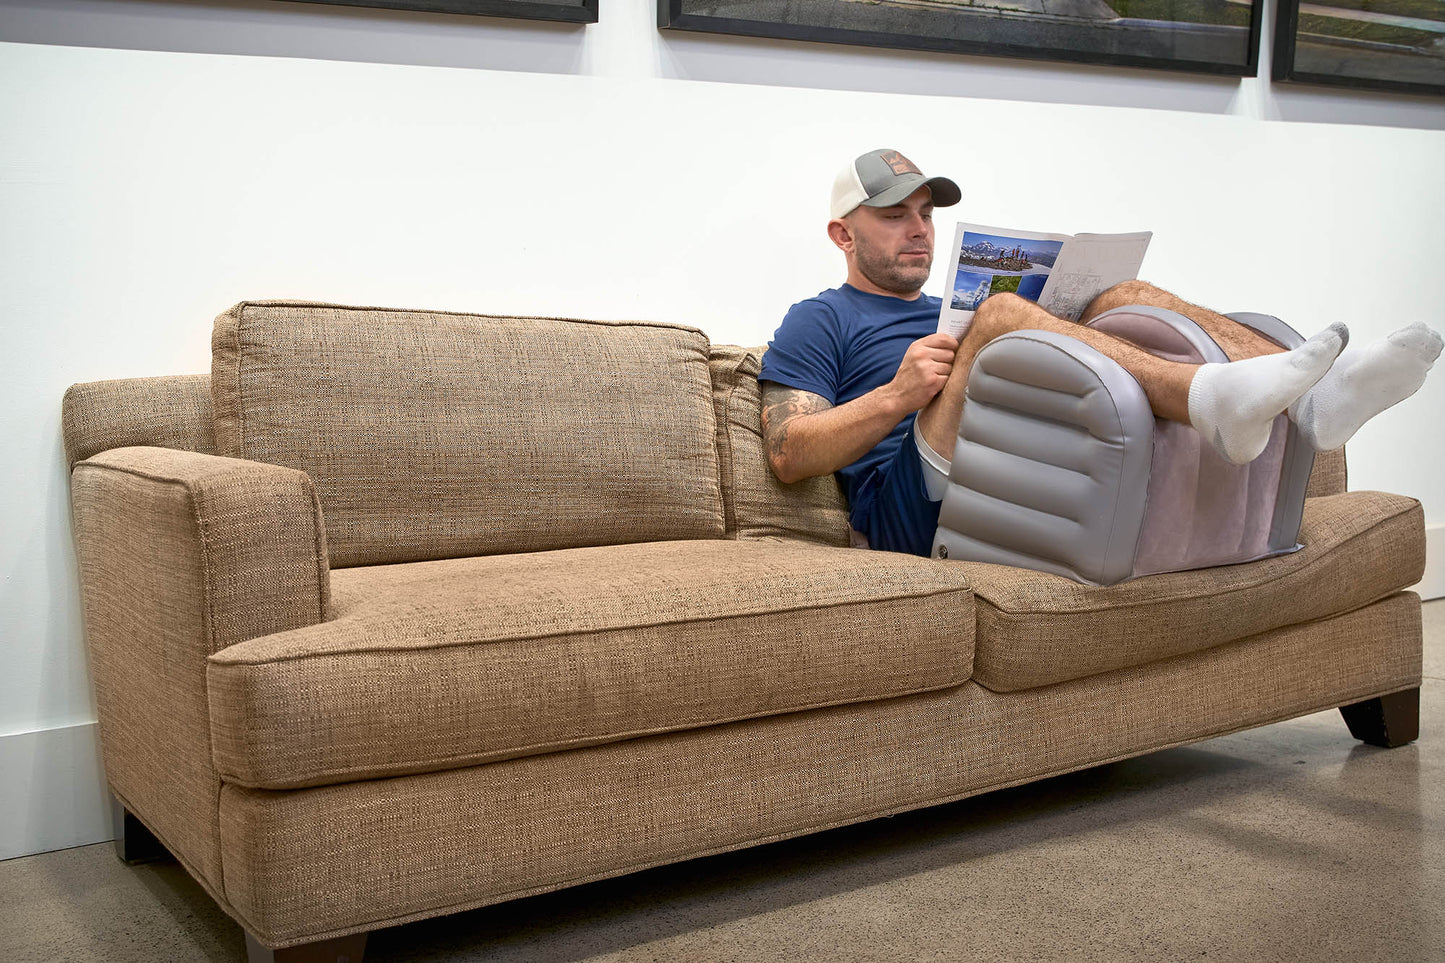 LBRT Couch Pillow for Back Pain Relief